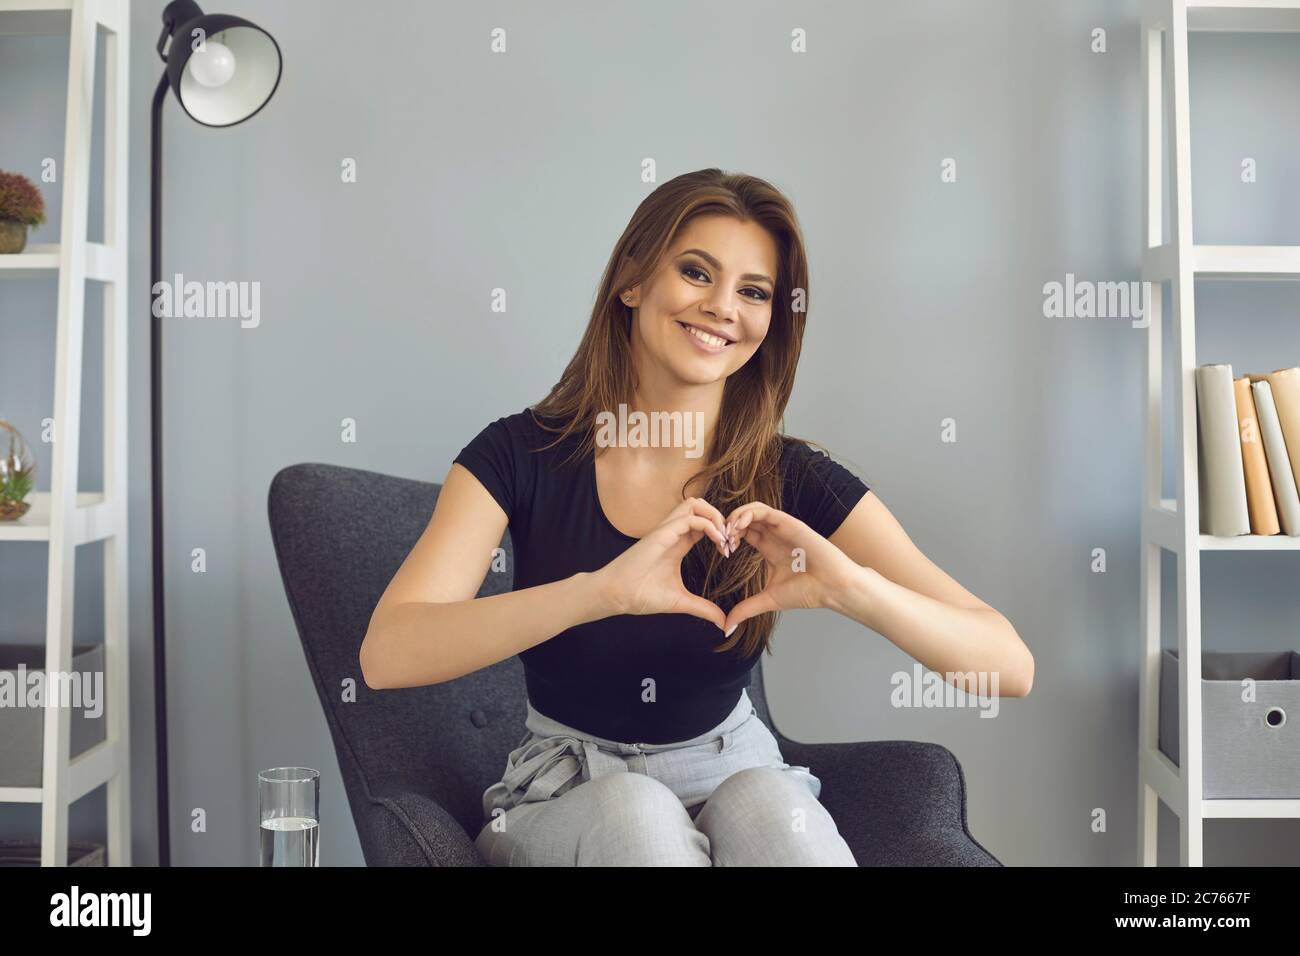 Online dating concept. Romantic young woman showing heart with hands during web conference with her boyfriend indoors Stock Photo